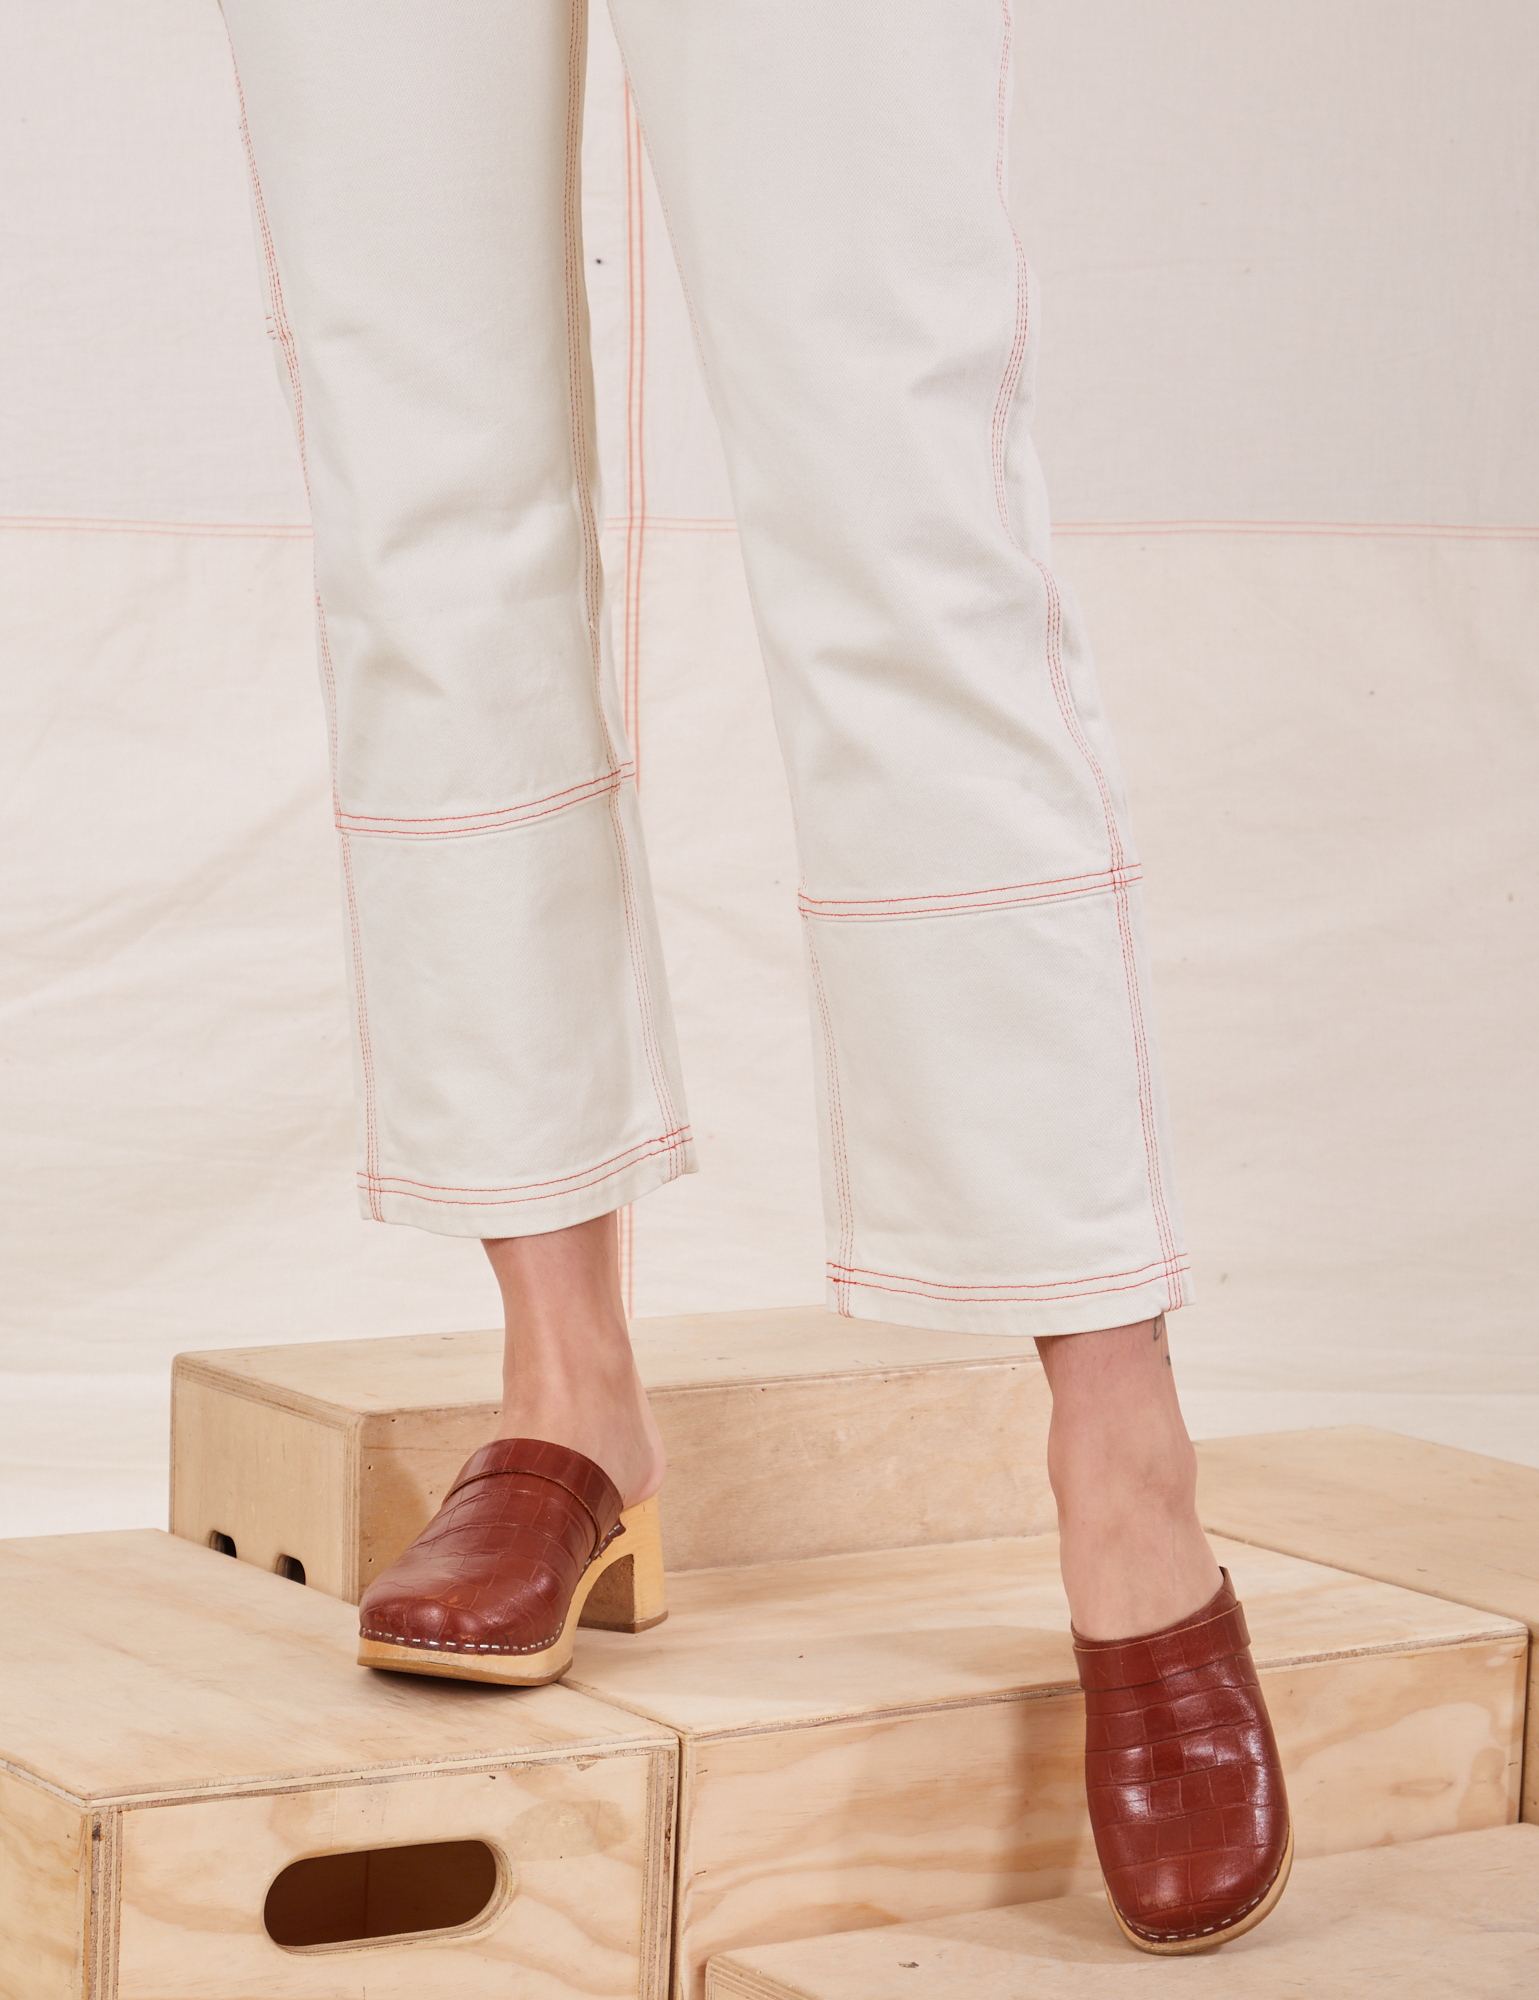 Carpenter Jeans in Vintage Tee Off-White pant leg close up on Alex